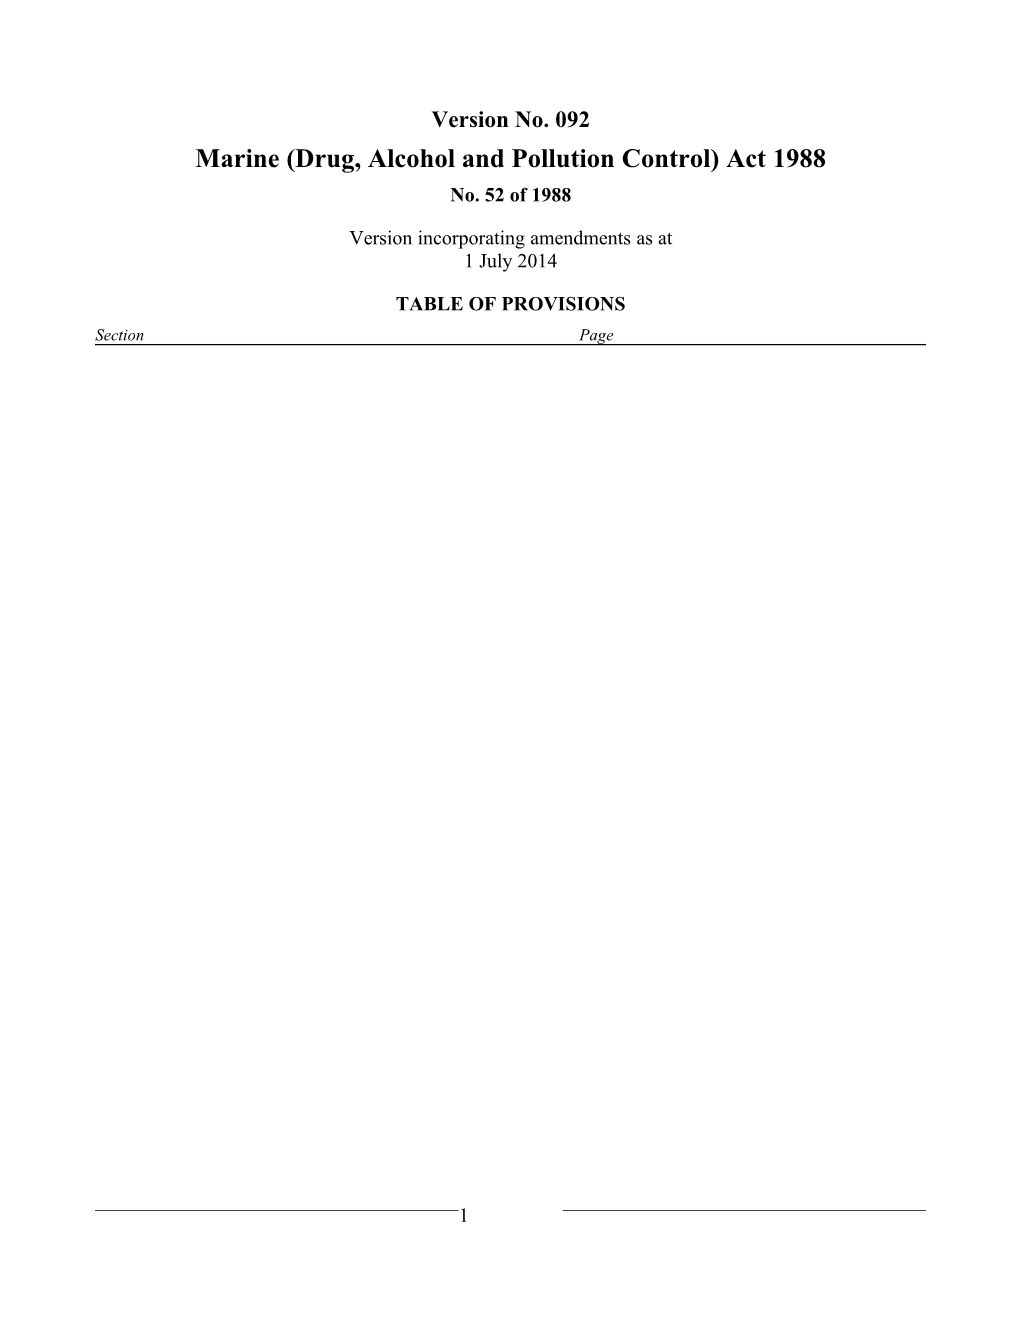 Marine (Drug, Alcohol and Pollution Control) Act 1988